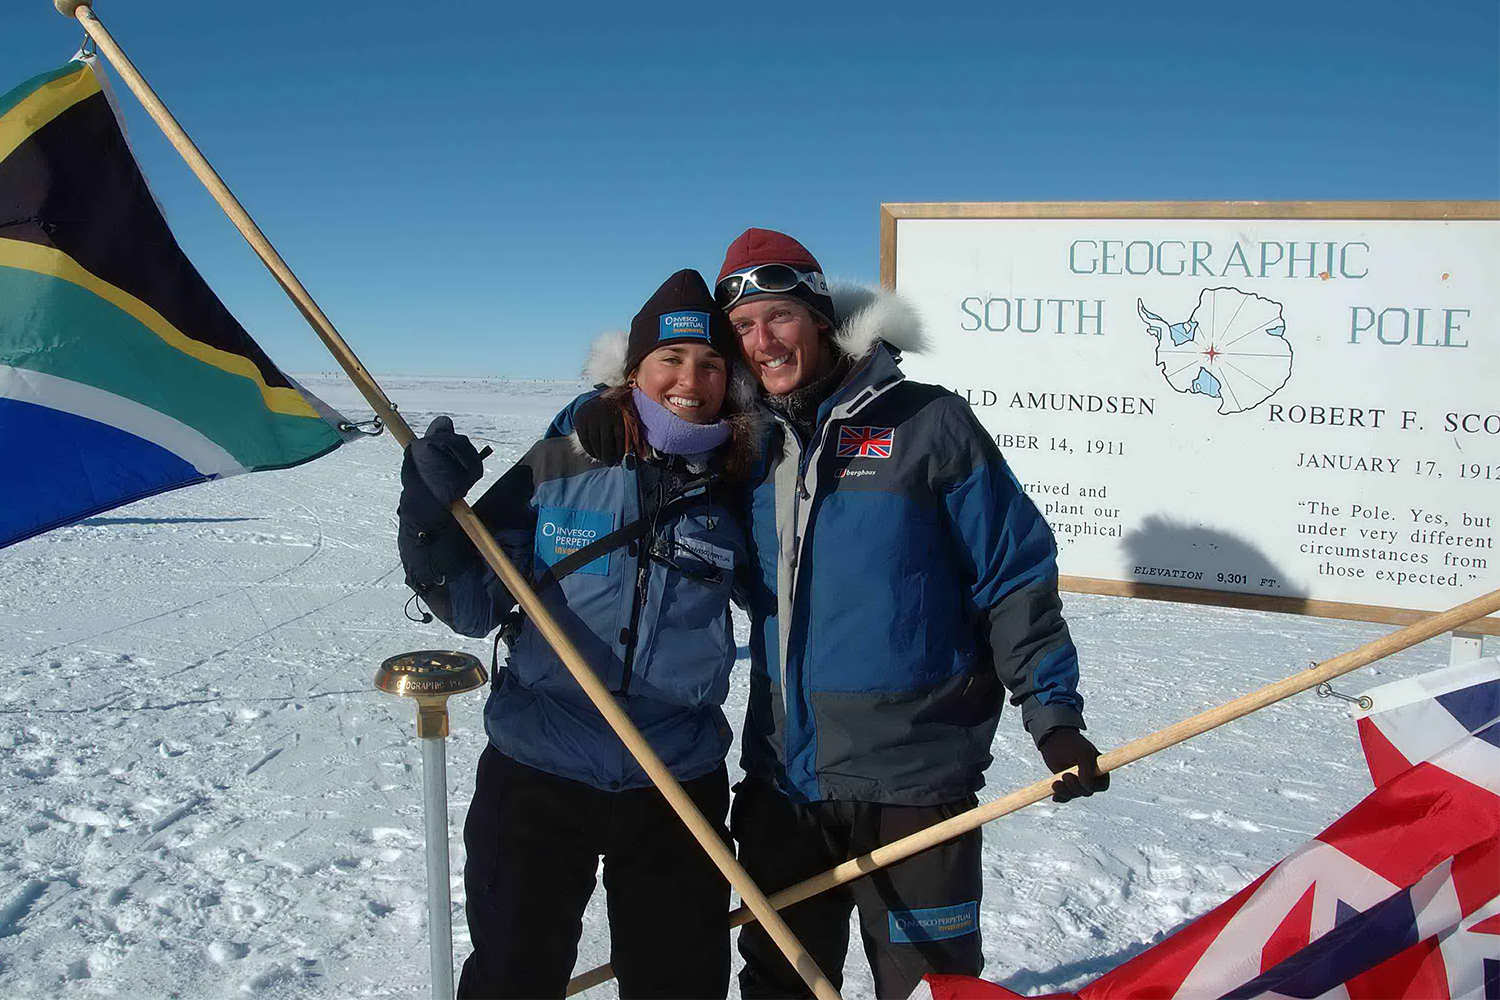 Robyn and Patrick Woodhead, co-founders of White Desert in Antarctica, at the South Pole